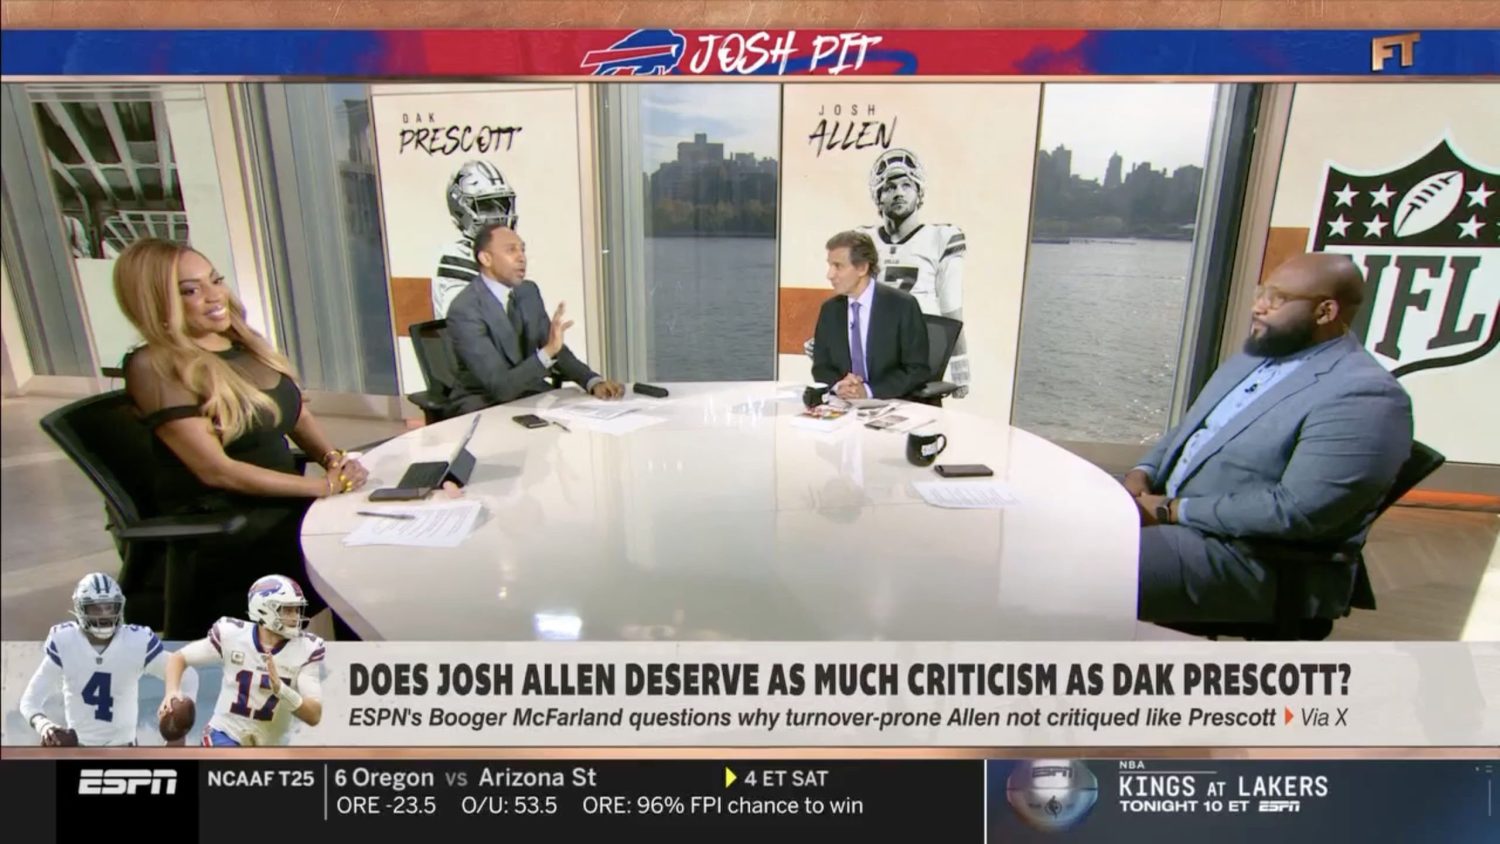 Stephen A. Smith discussing Josh Allen on First Take